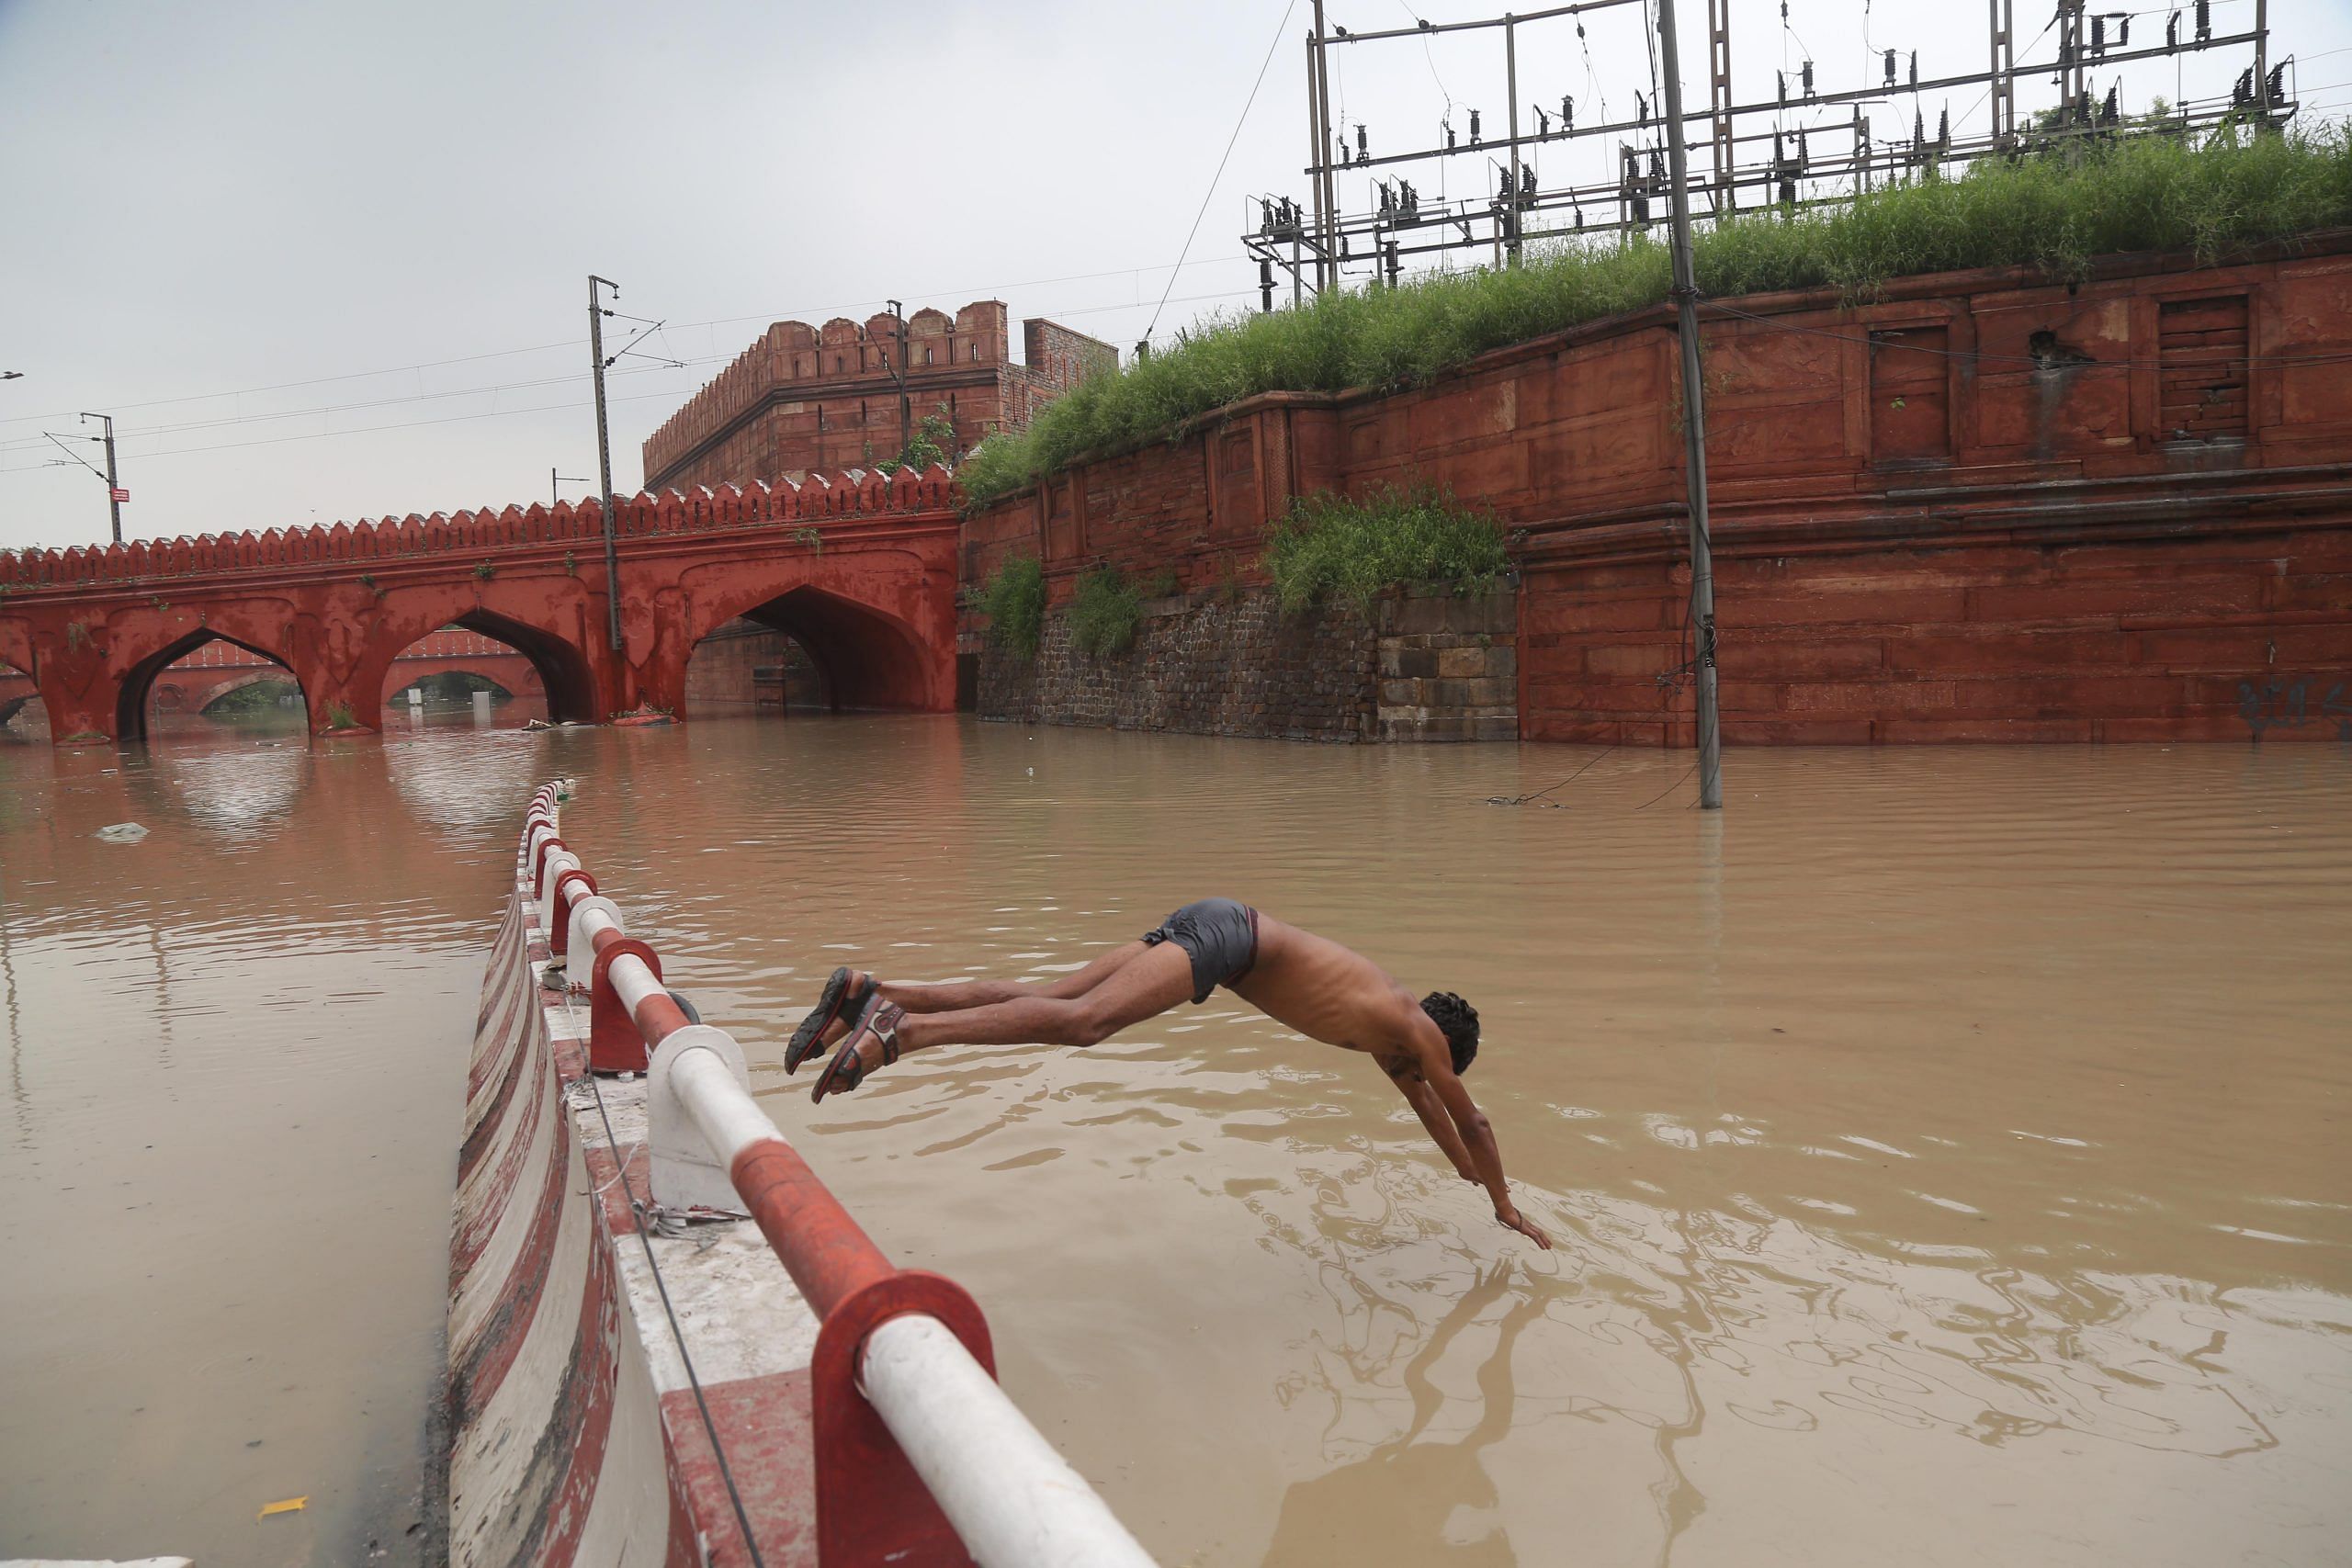 The flooded Yamuna in the national capital this year brought misery to many, who found their houses submerged. For this youth near Delhi's iconic Red Fort, however, the gushing water was perfect for a swim. It is this conflicting play of emotions that make this a memorable image for me this year | Photo: Suraj Singh Bisht | ThePrint